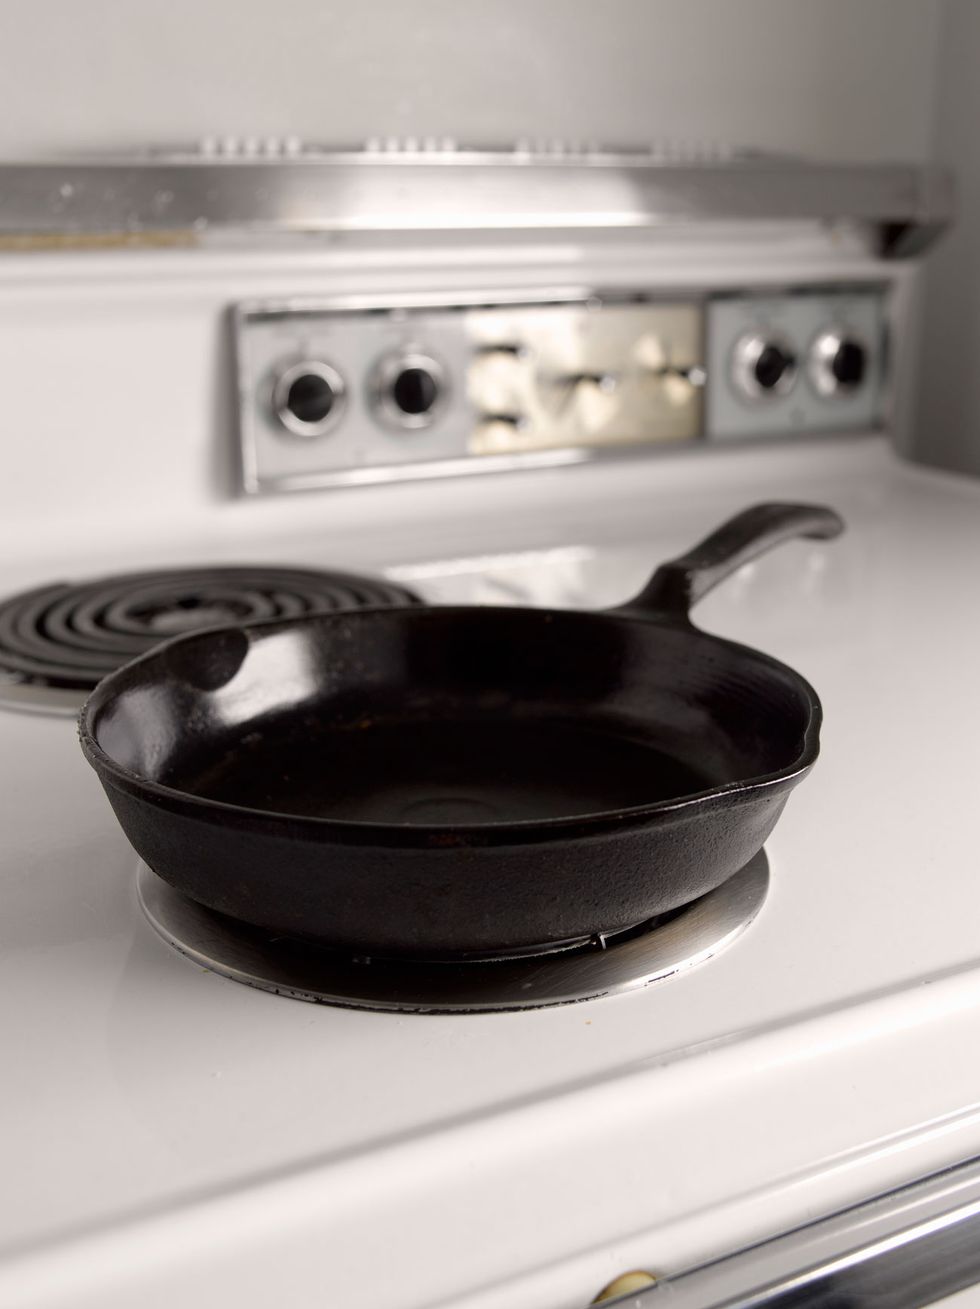 Cookware and bakeware, Kitchen stove, Major appliance, Stove, Home appliance, Cooktop, Room, Gas stove, Frying pan, Small appliance, 